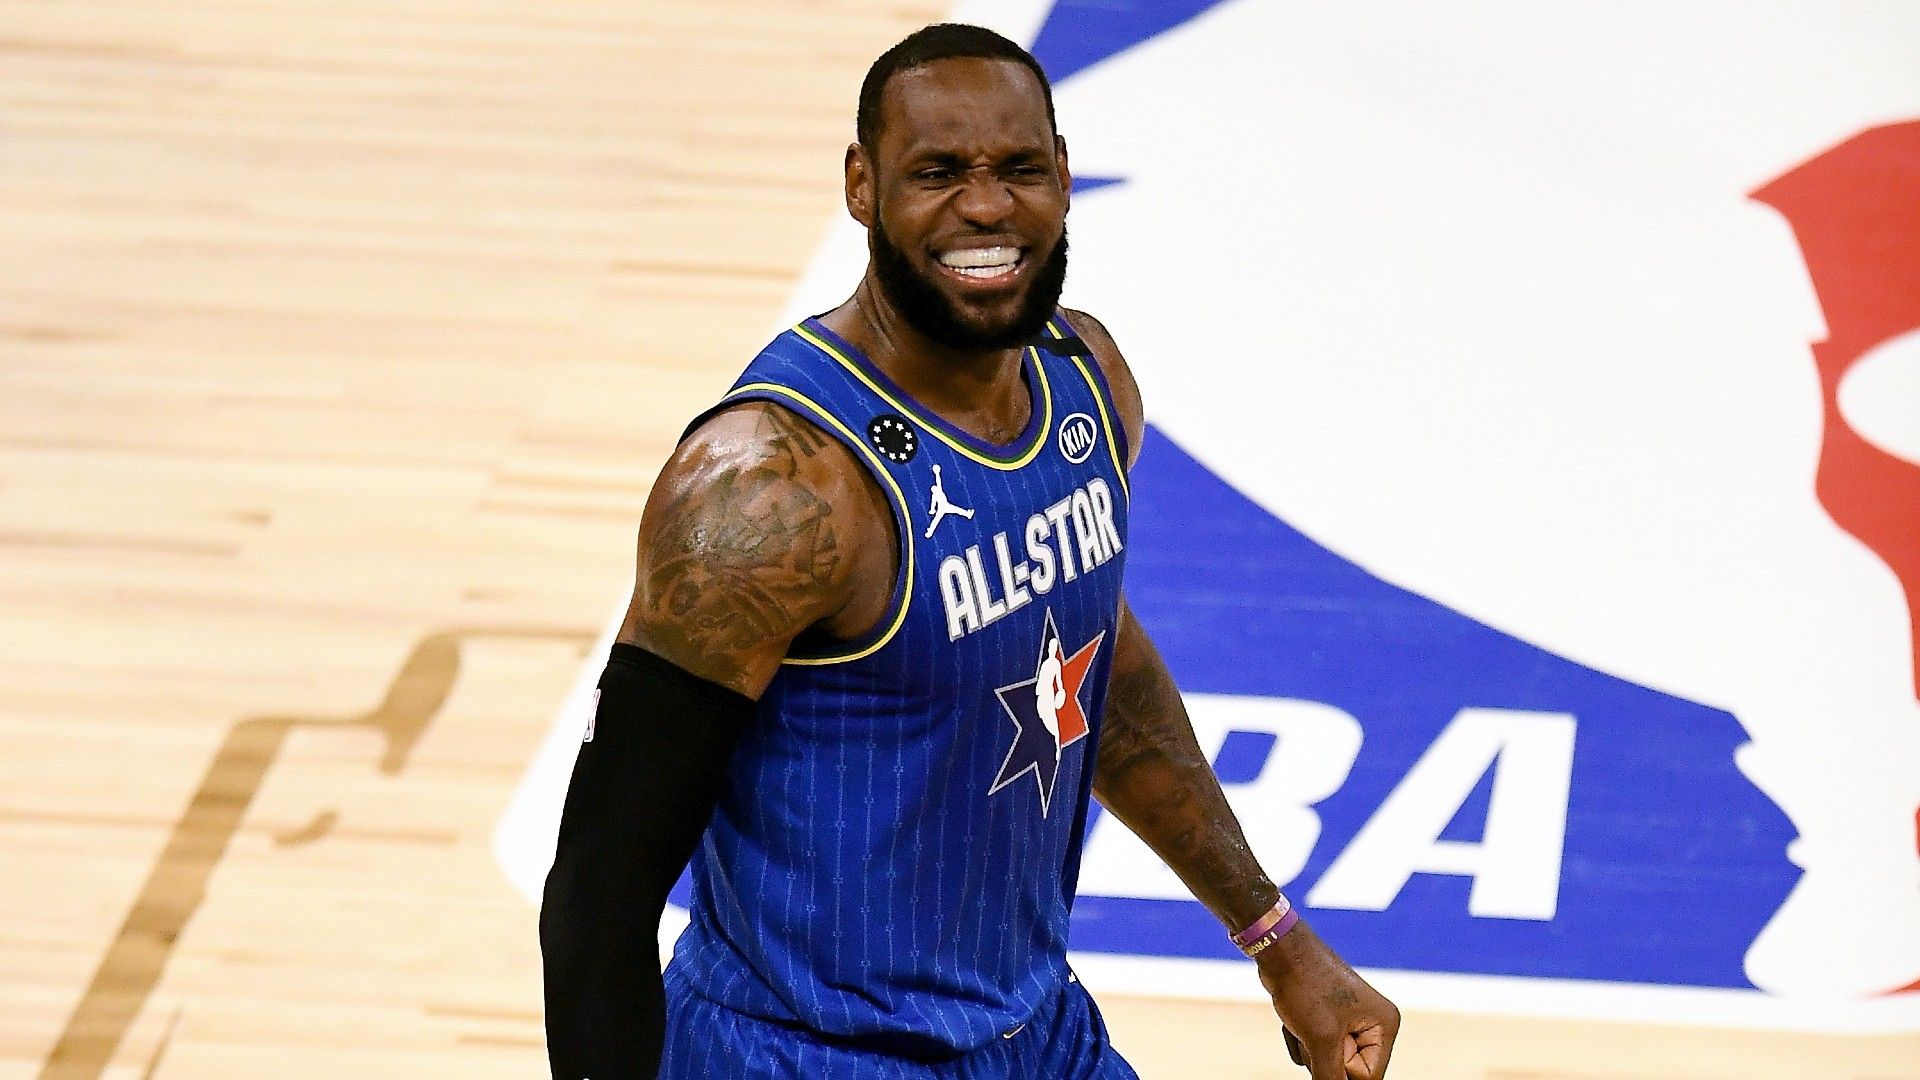 NBA All Star Voting Results 2021: Full List Of Starters, Reserves For Eastern, Western Conference Rosters